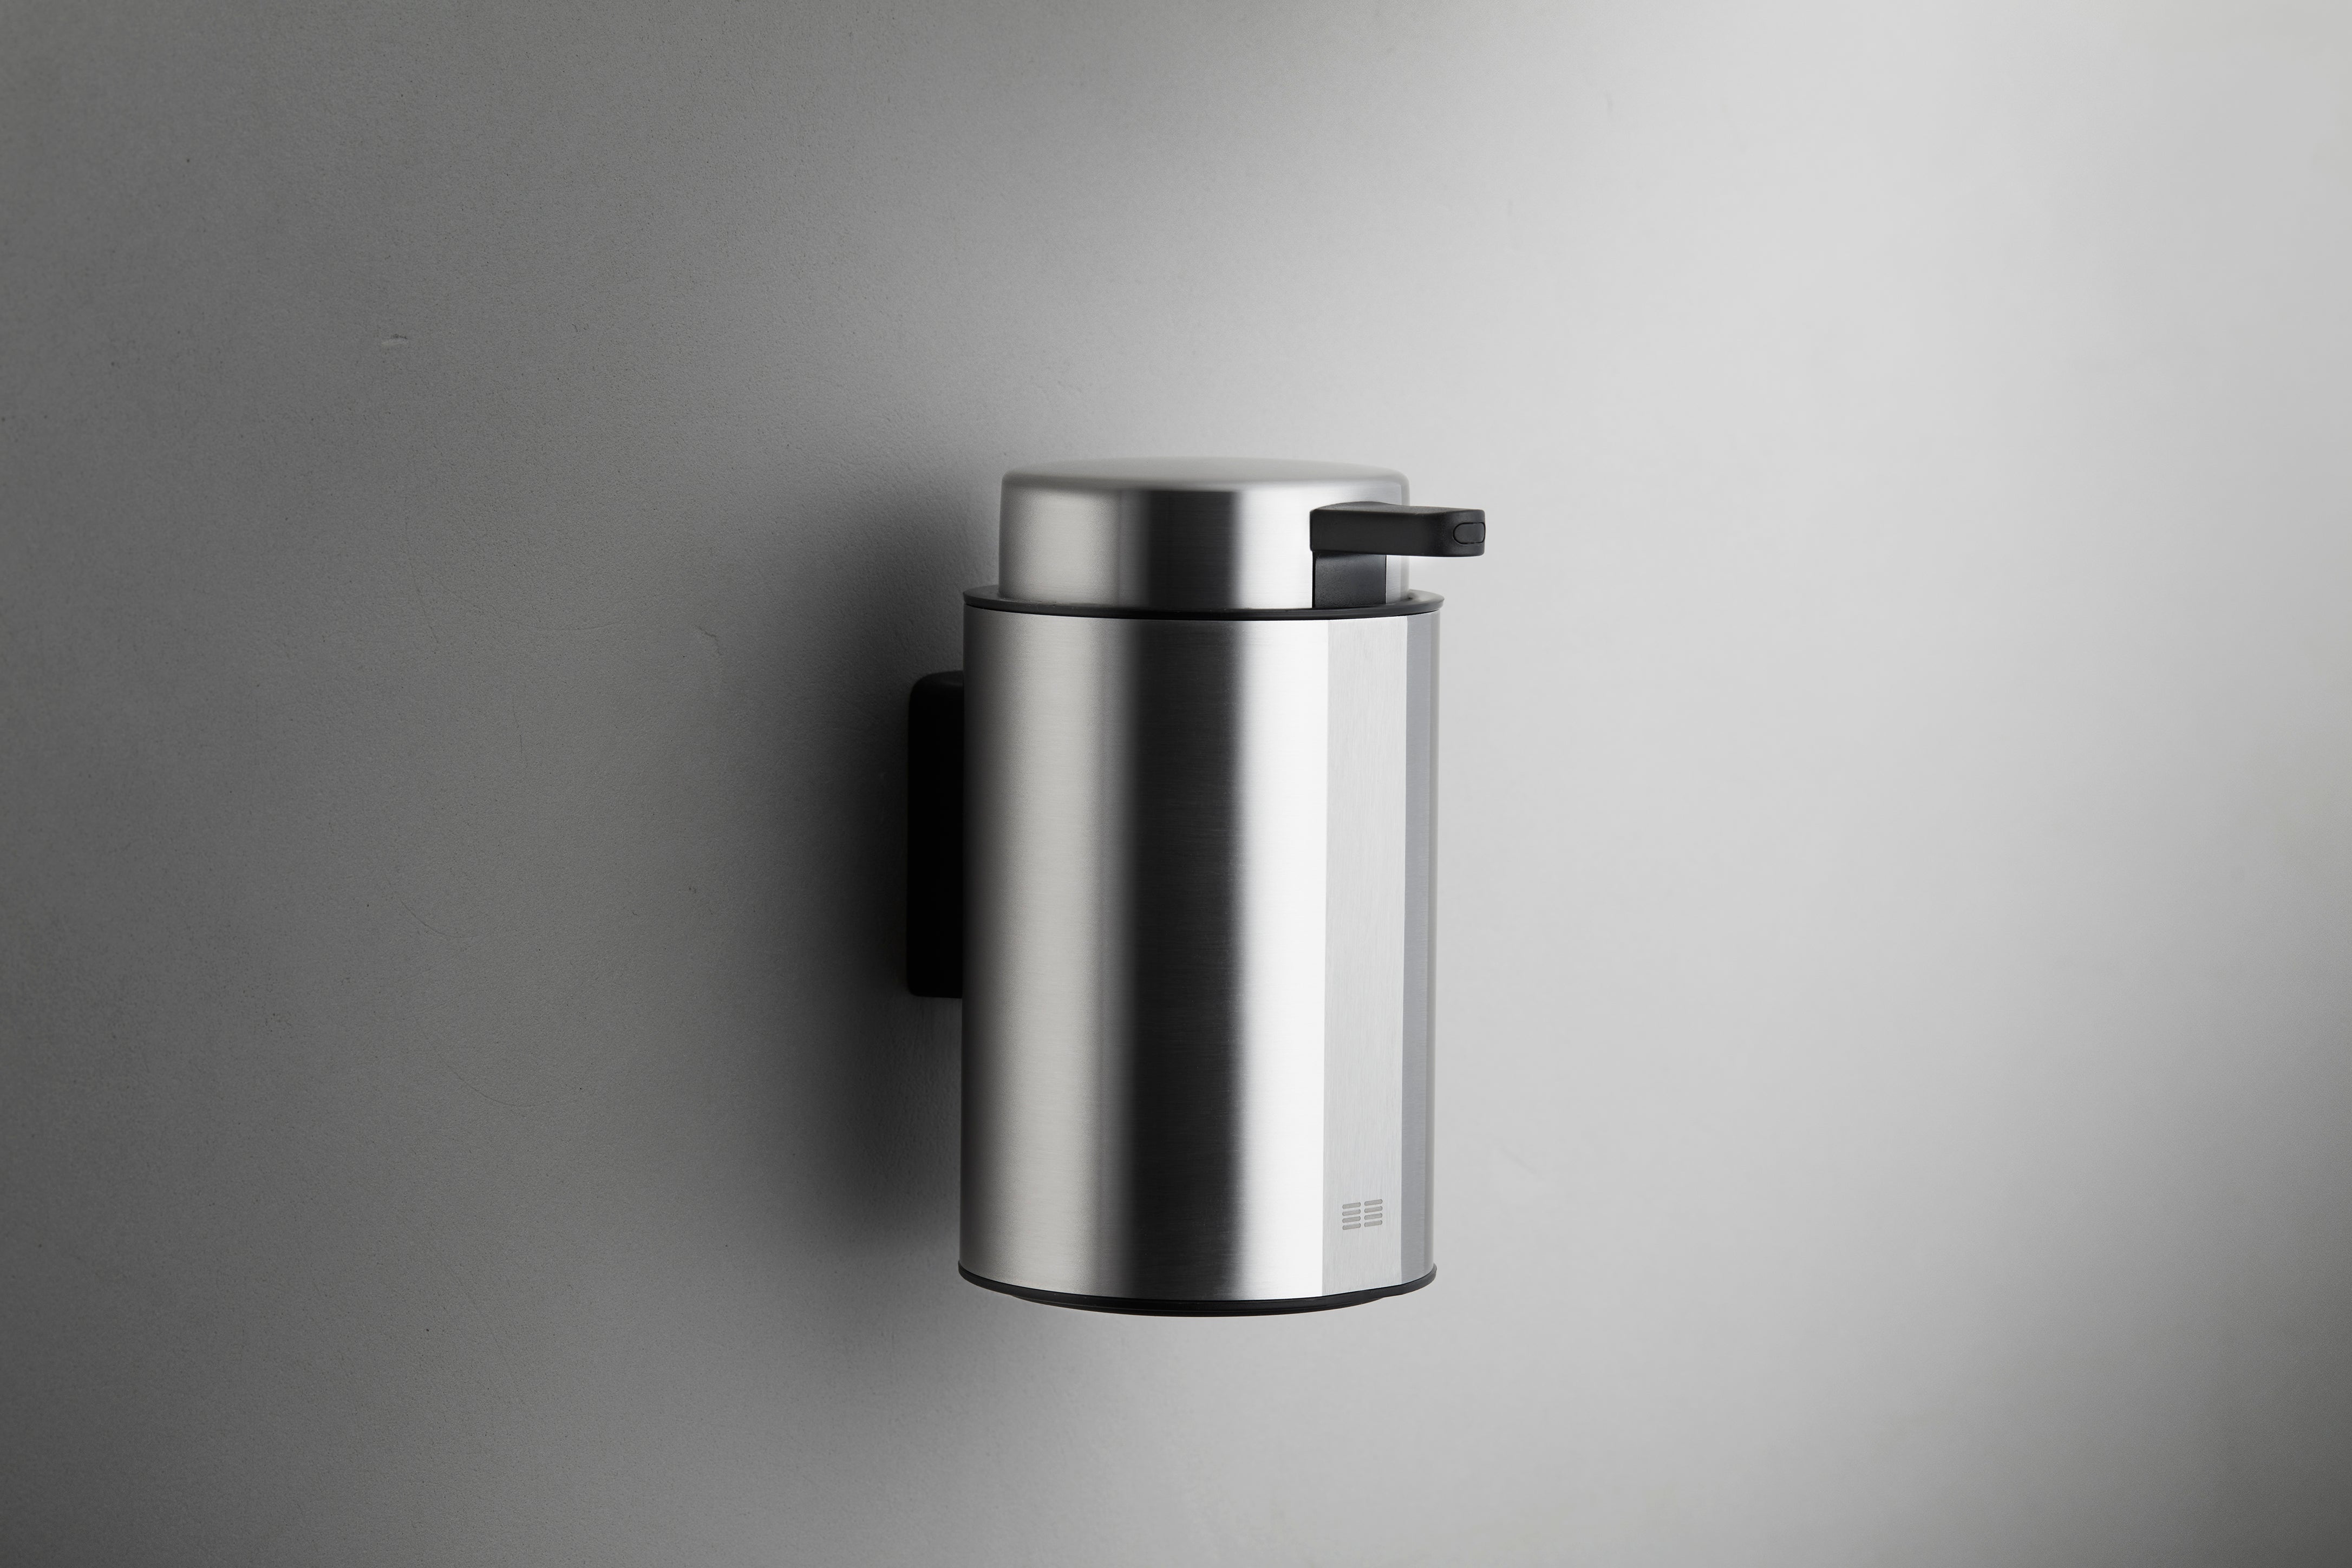 Unidrain Reframe wall soap dispenser - brushed stainless steel